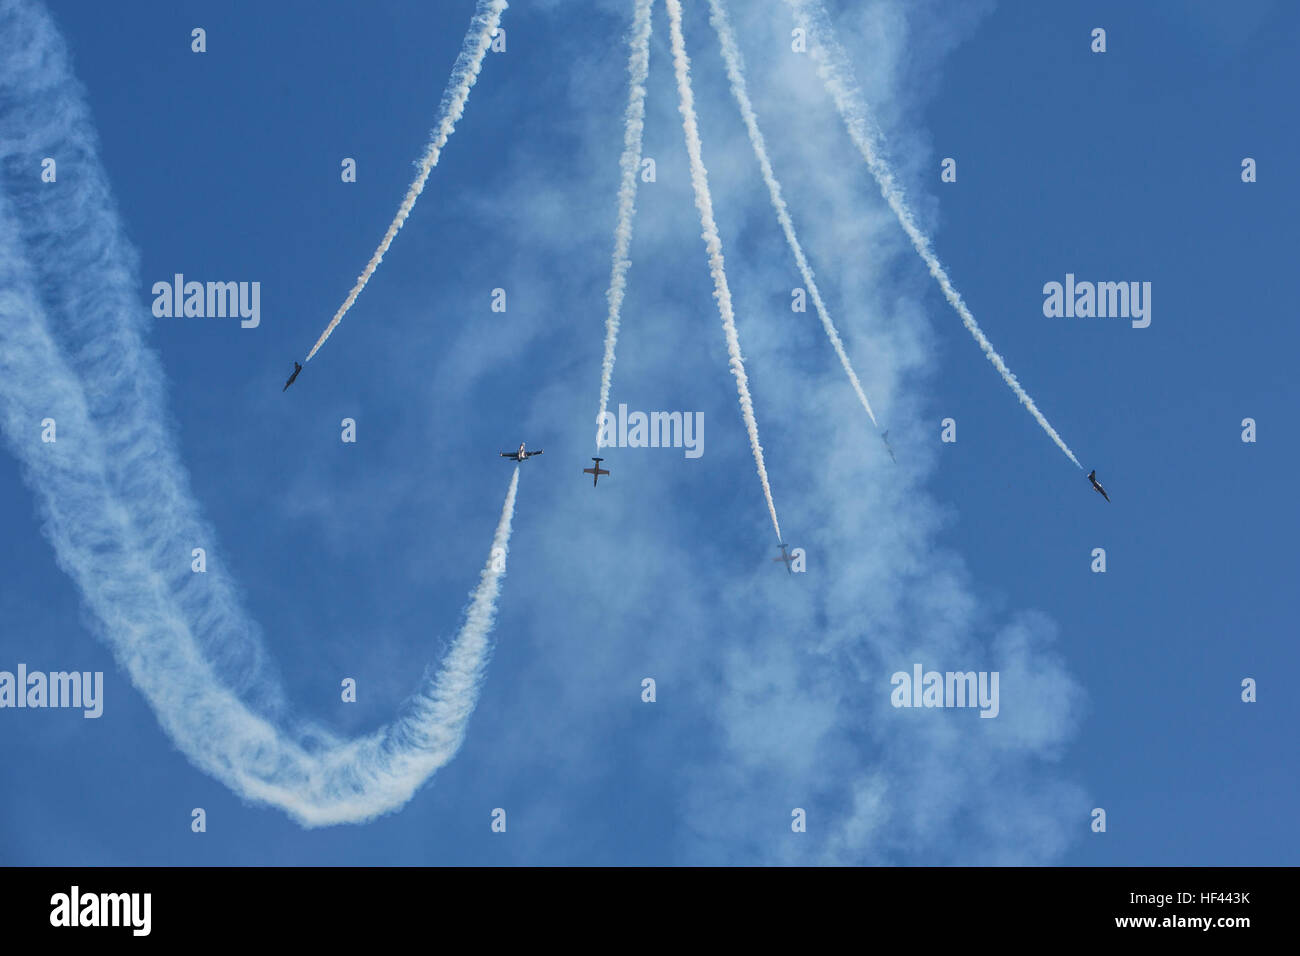 U.S. Navy Blue Angels perform aerobic maneuvers during the 2016 Marine Corps Air Station (MCAS) Miramar Air Show at MCAS Miramar, Calif., Sept. 24, 2016. The MCAS Miramar Air Show honors 100 years of the Marine Corps Reserves by showcasing aerial prowess of the Armed Forces and their appreciation of the civilian community’s support to the troops. (U.S. Marine Corps photo By Corporal Jessica Y. Lucio/Released) MCAS Miramar Air Show 160924-M-UX416-023 Stock Photo